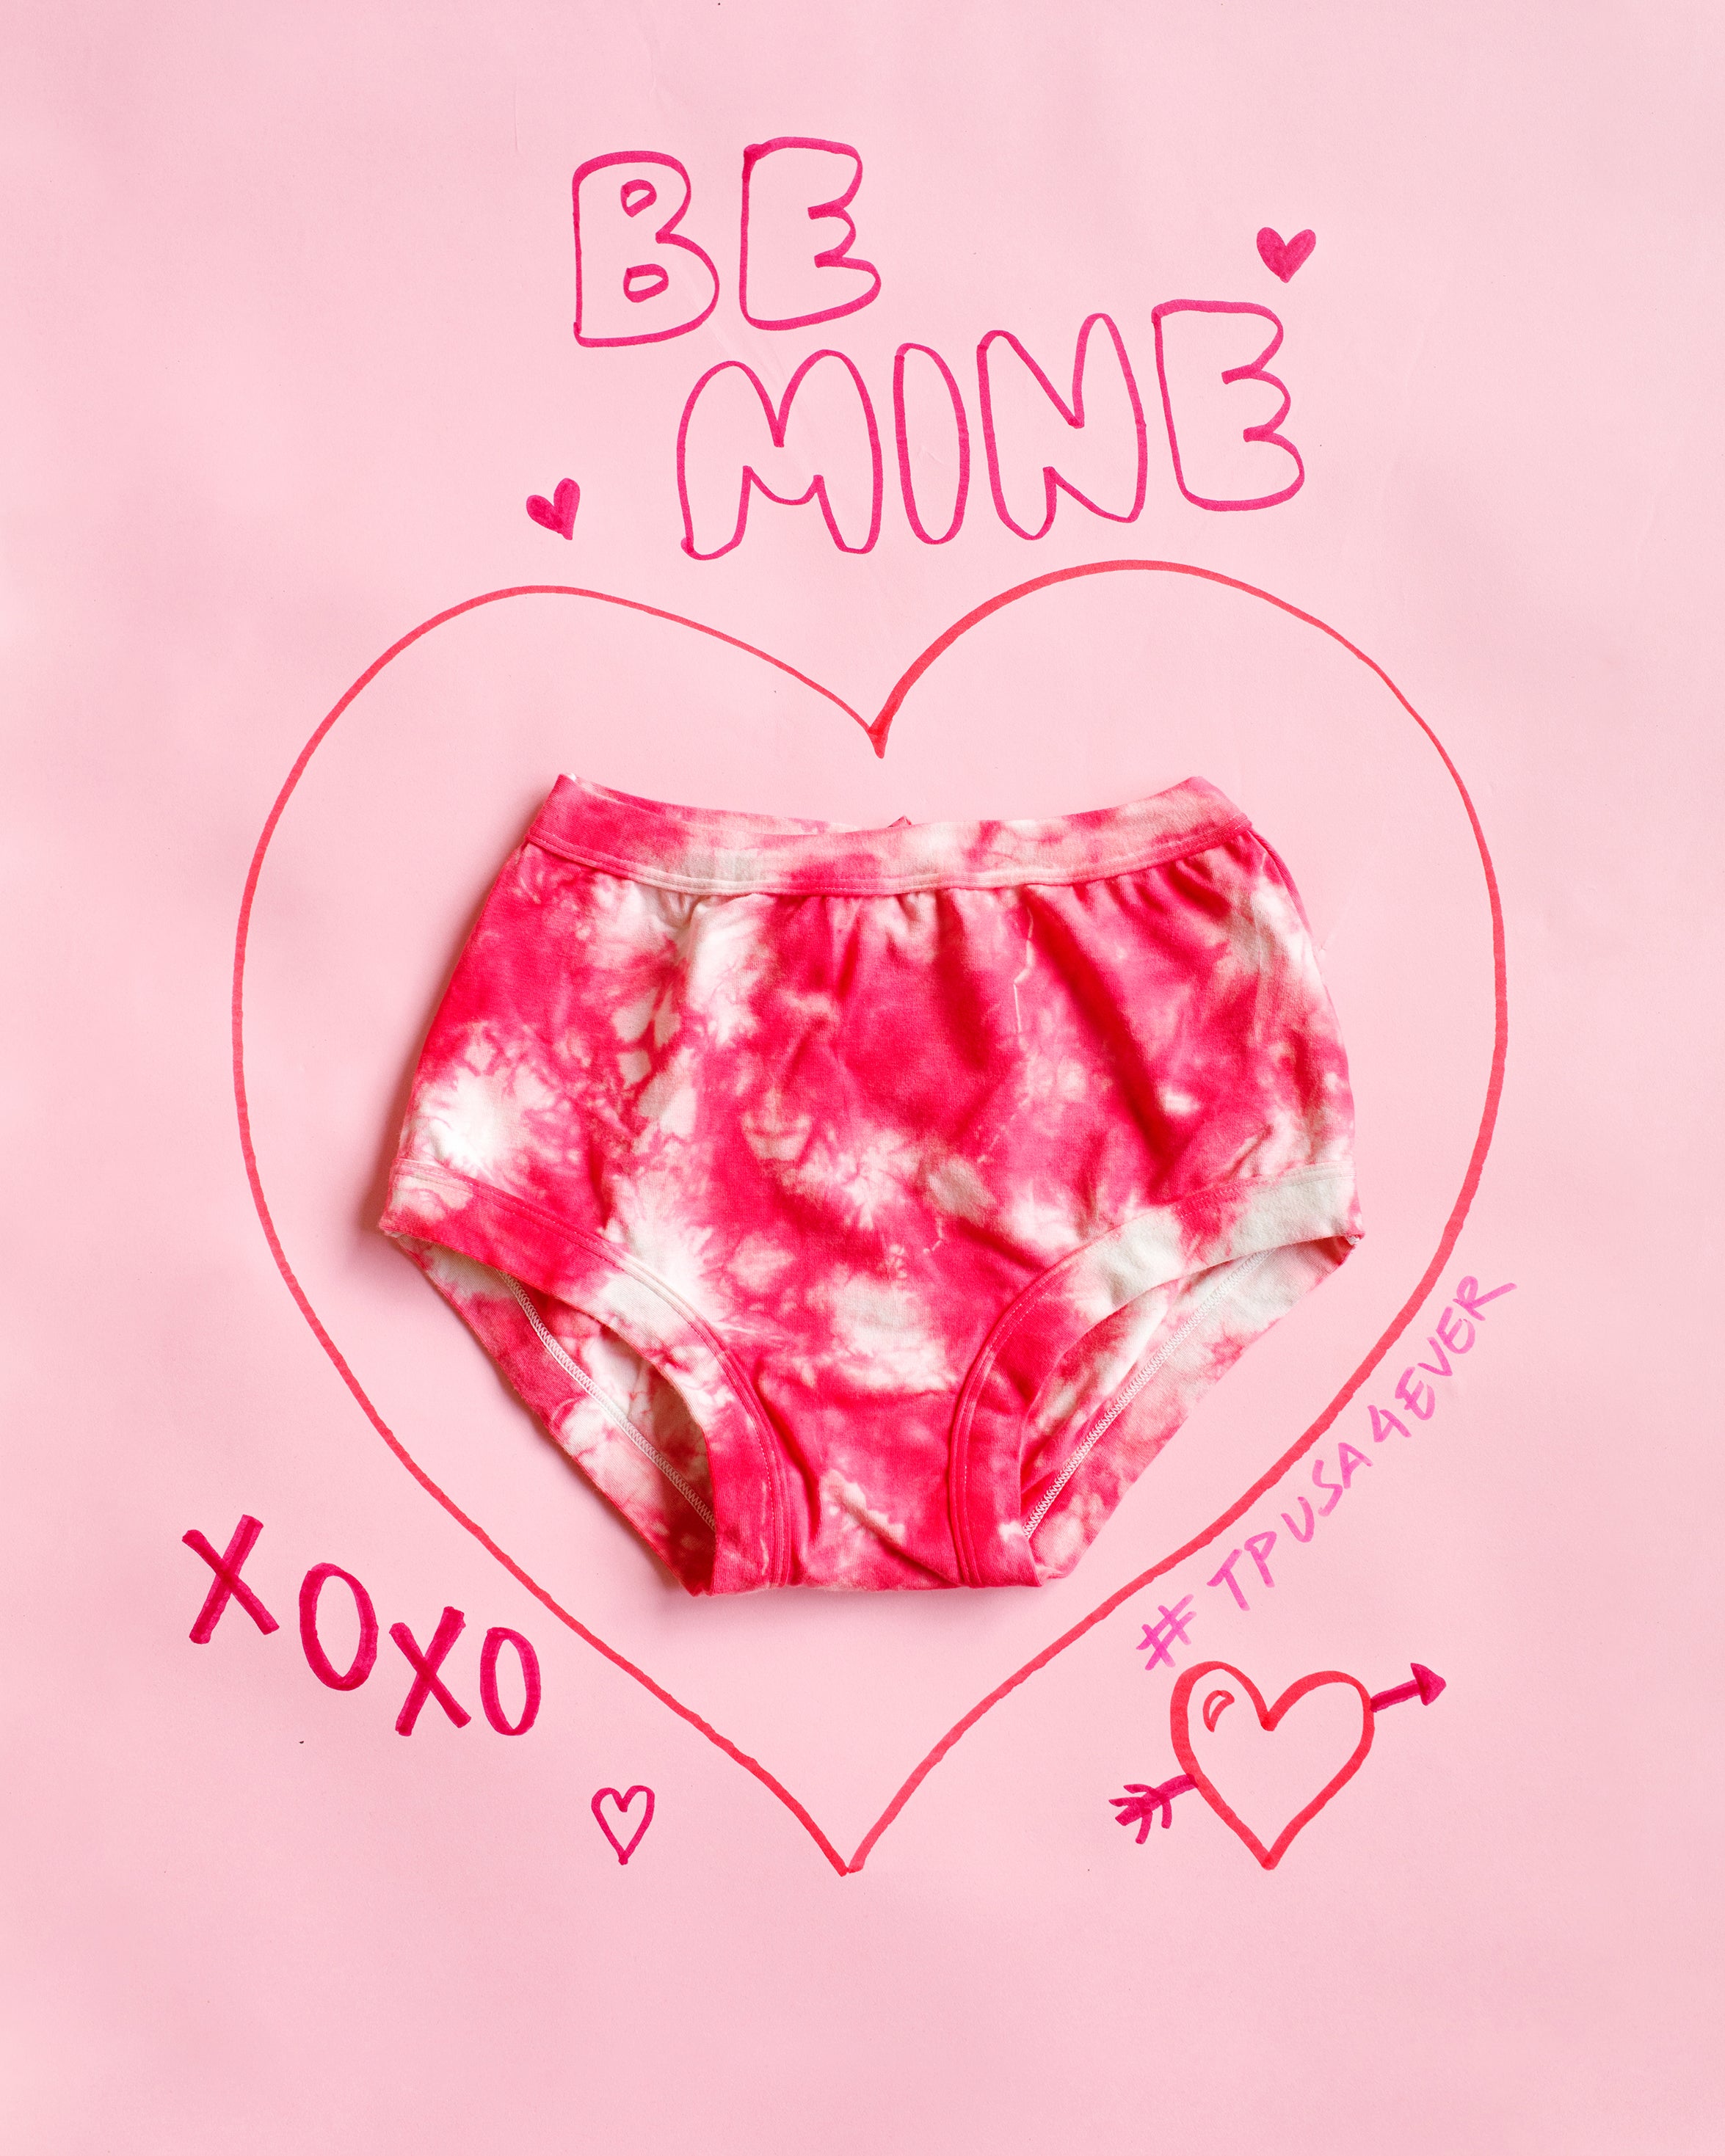 Flat lay of Thunderpants Original style underwear with red and white scrunch dye on a pink background with writing on it.